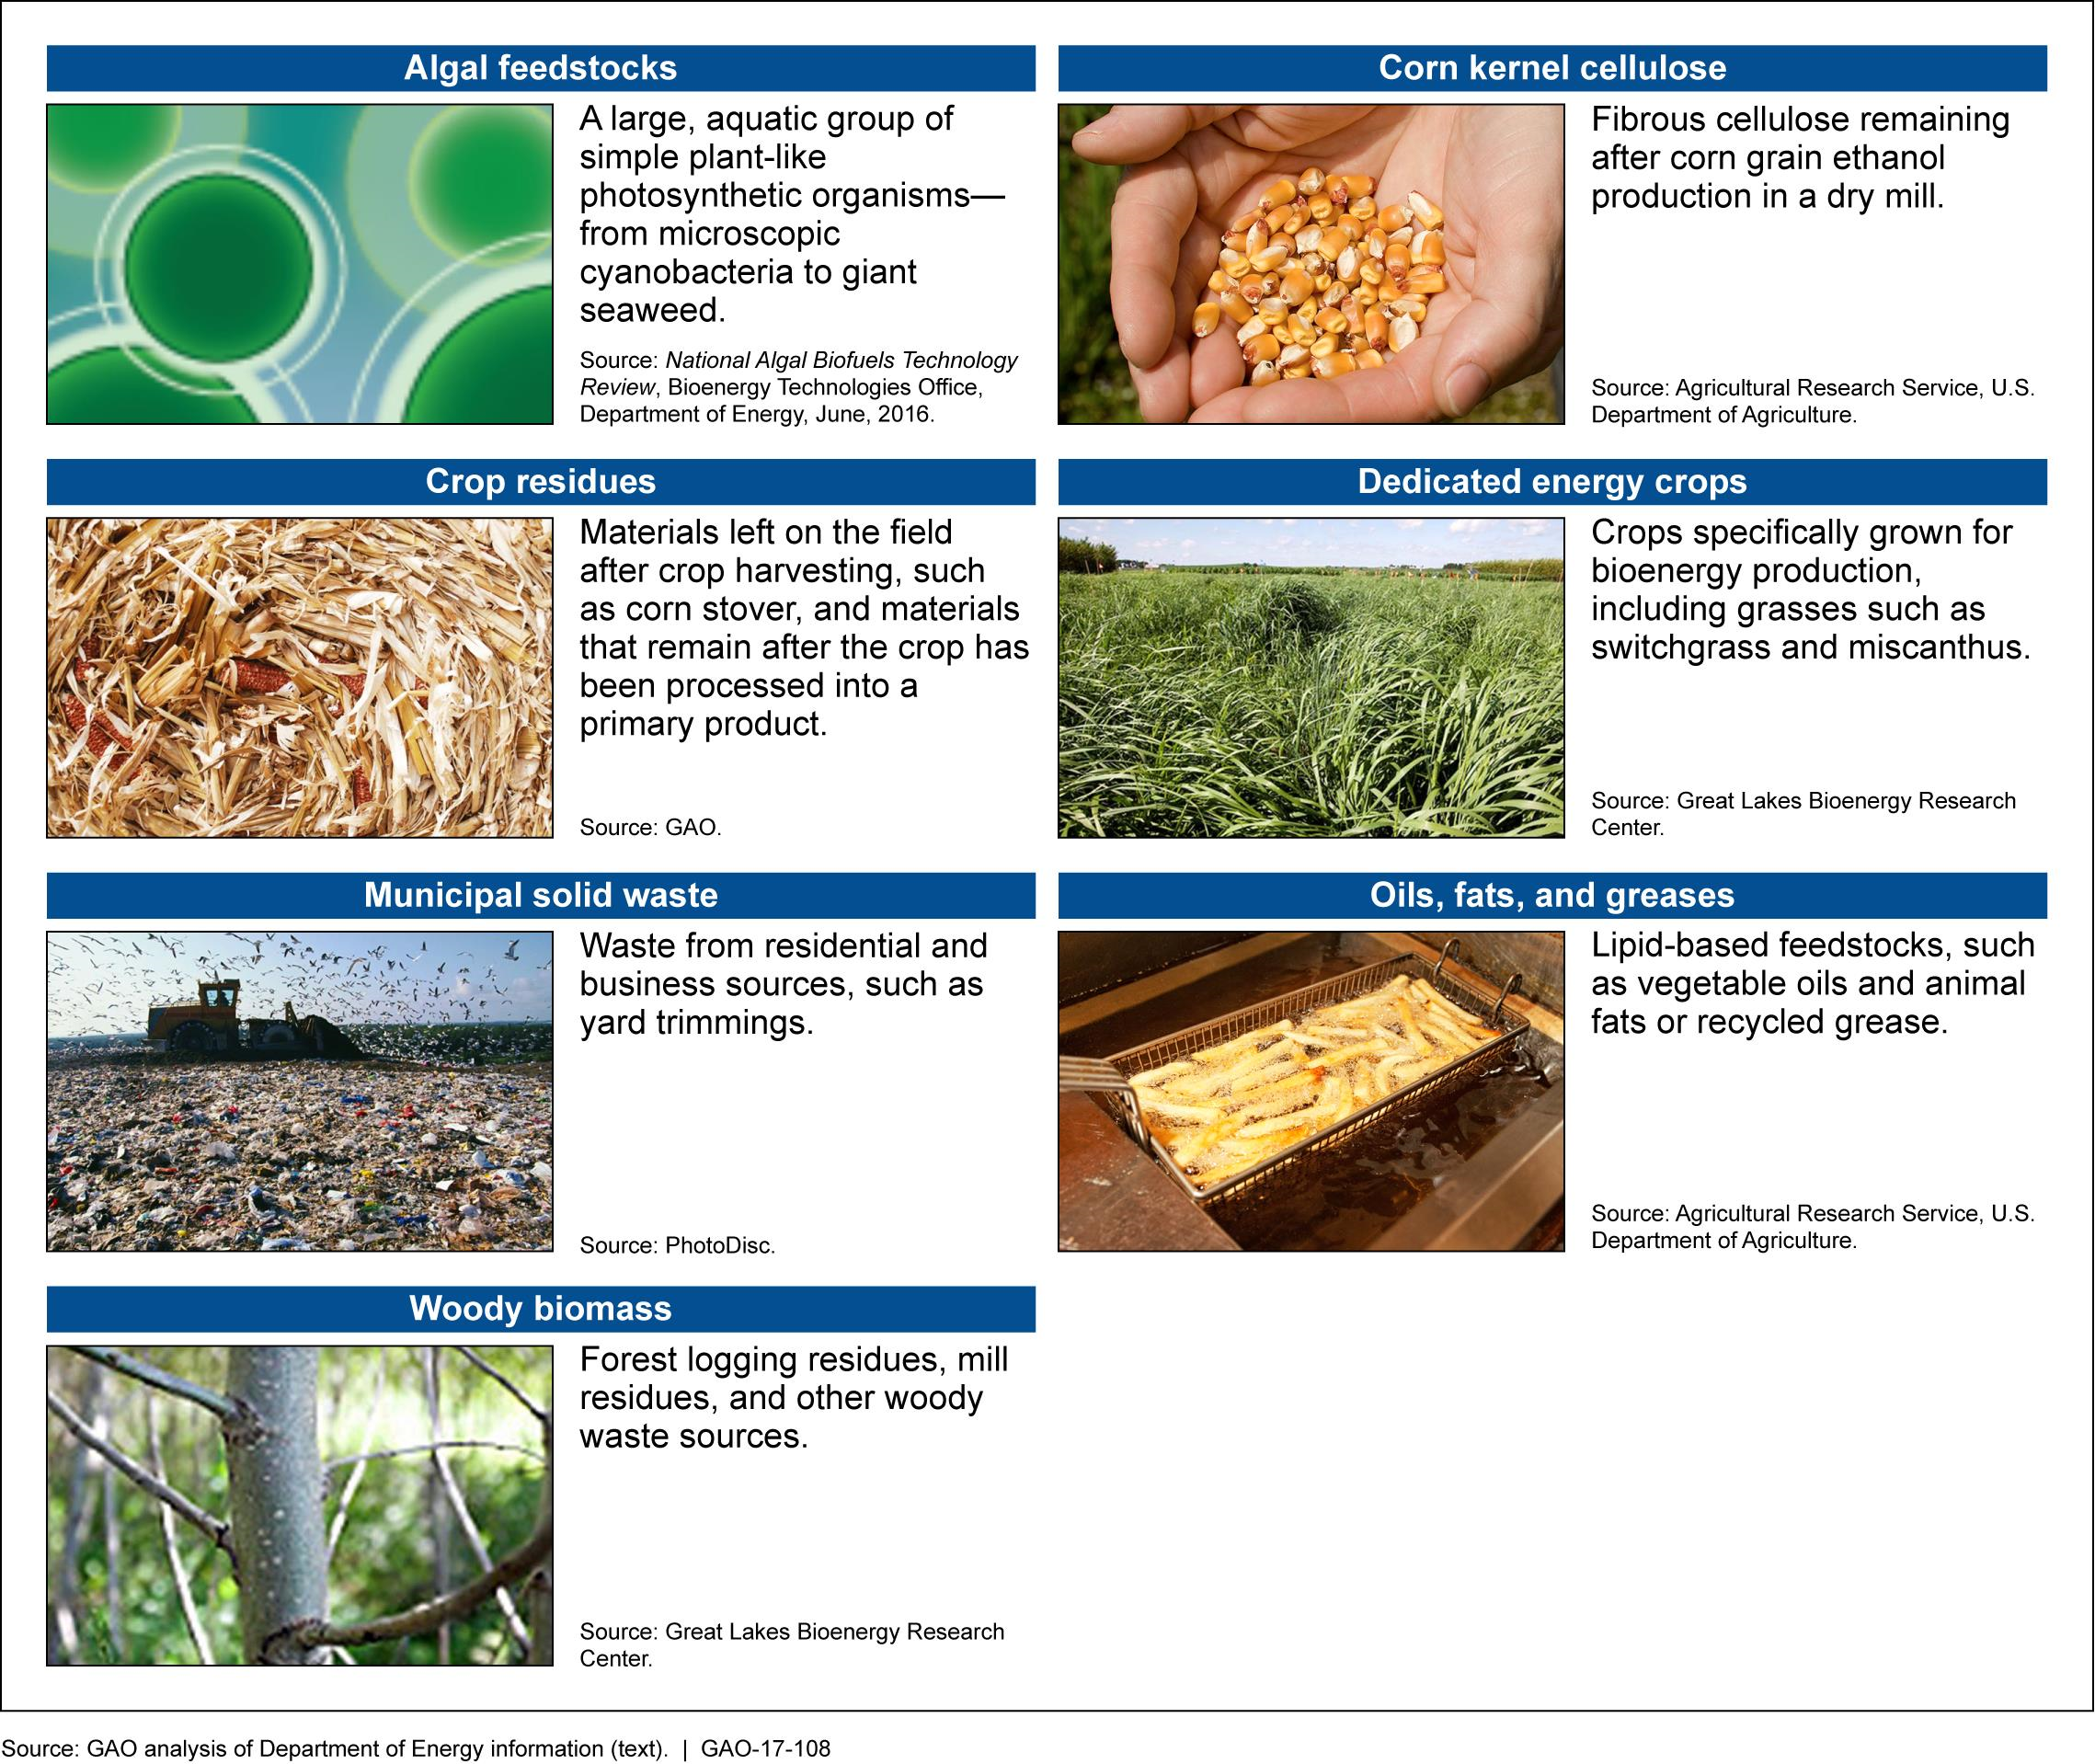 7 examples of biofuels feedstocks, including corn kernel cellulose, frying oils, and woody biomass.